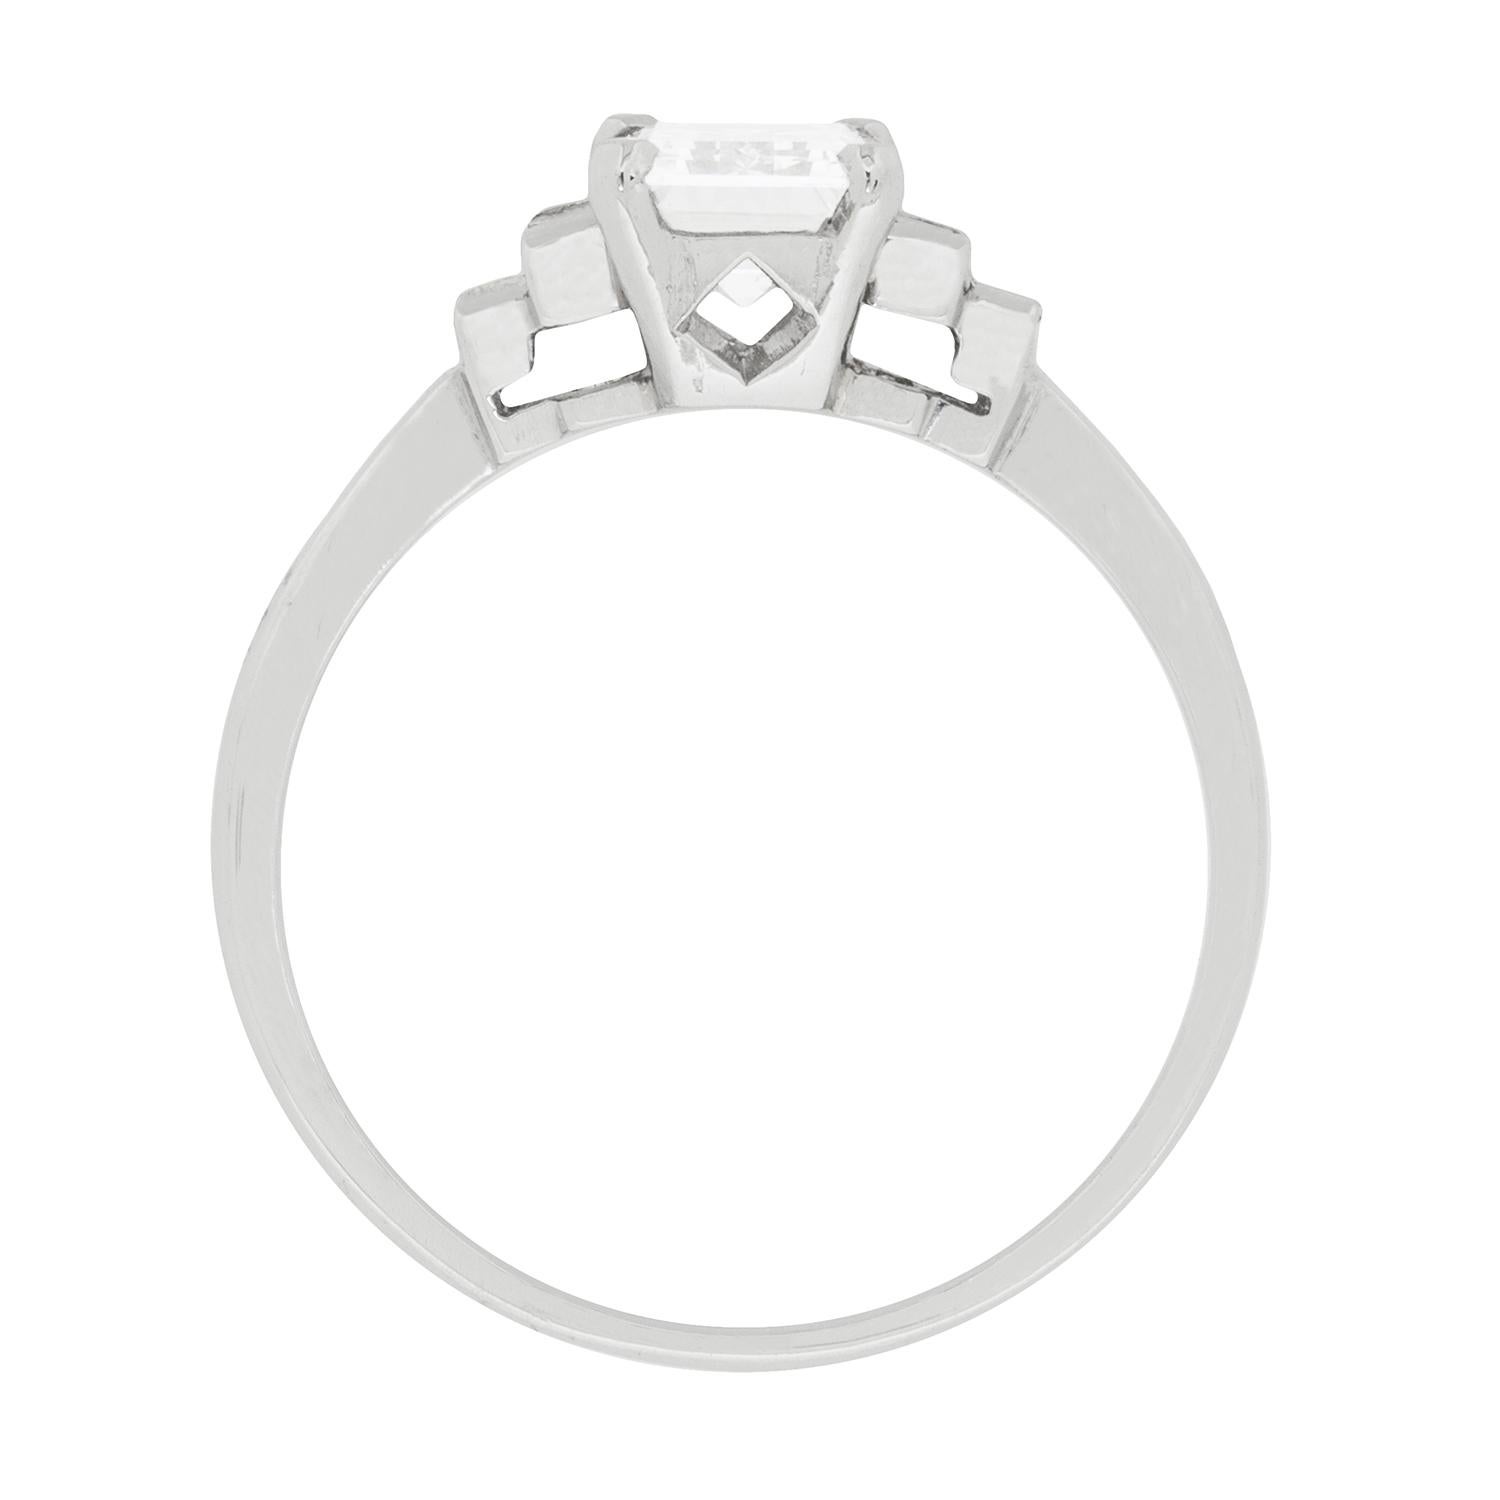 This geometric and stunning engagement ring dates to the 1940s, and features a centre Emerald cut diamond weighing 1.02 carat. It has been certified by world-wide certification company HRD as a F in colour and VS1 in clarity. It is perfectly set